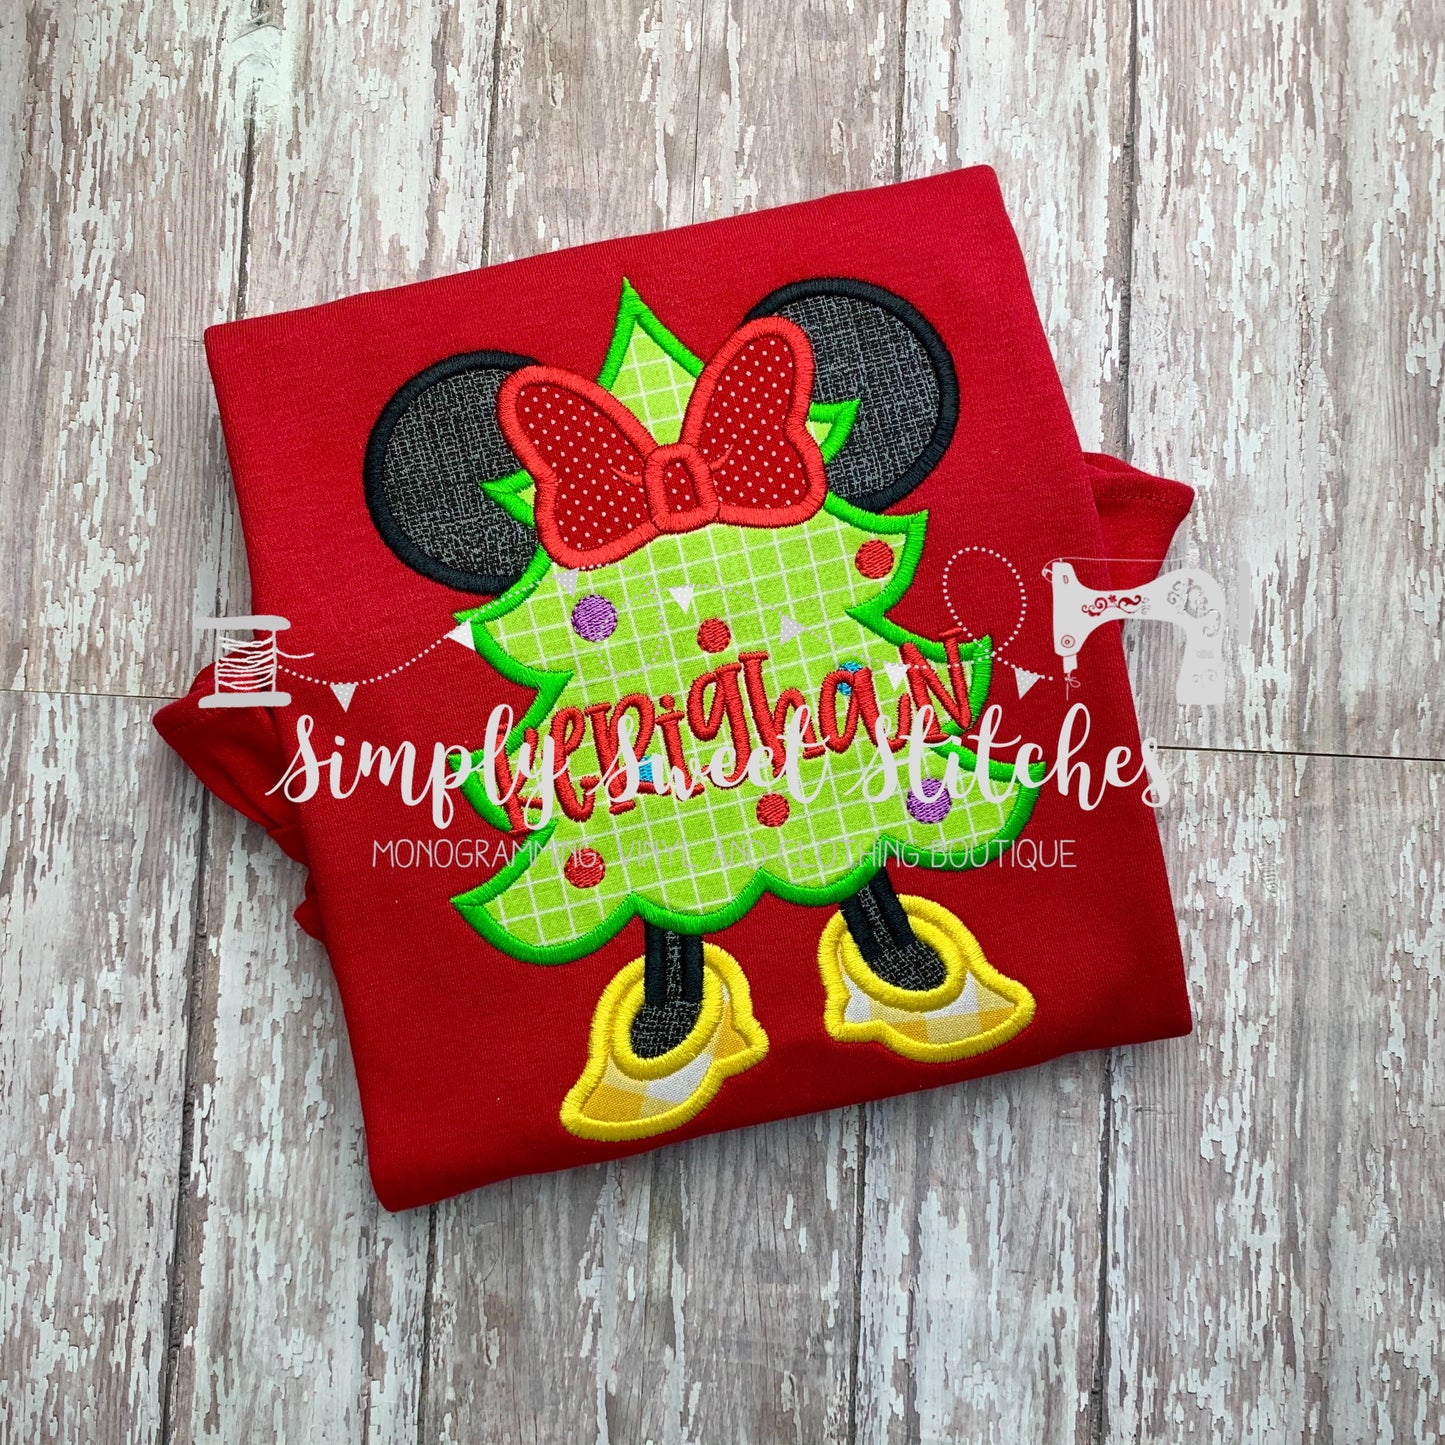 5131 - MISS MOUSE CHRISTMAS TREE APPLIQUE - CHILD SHIRT